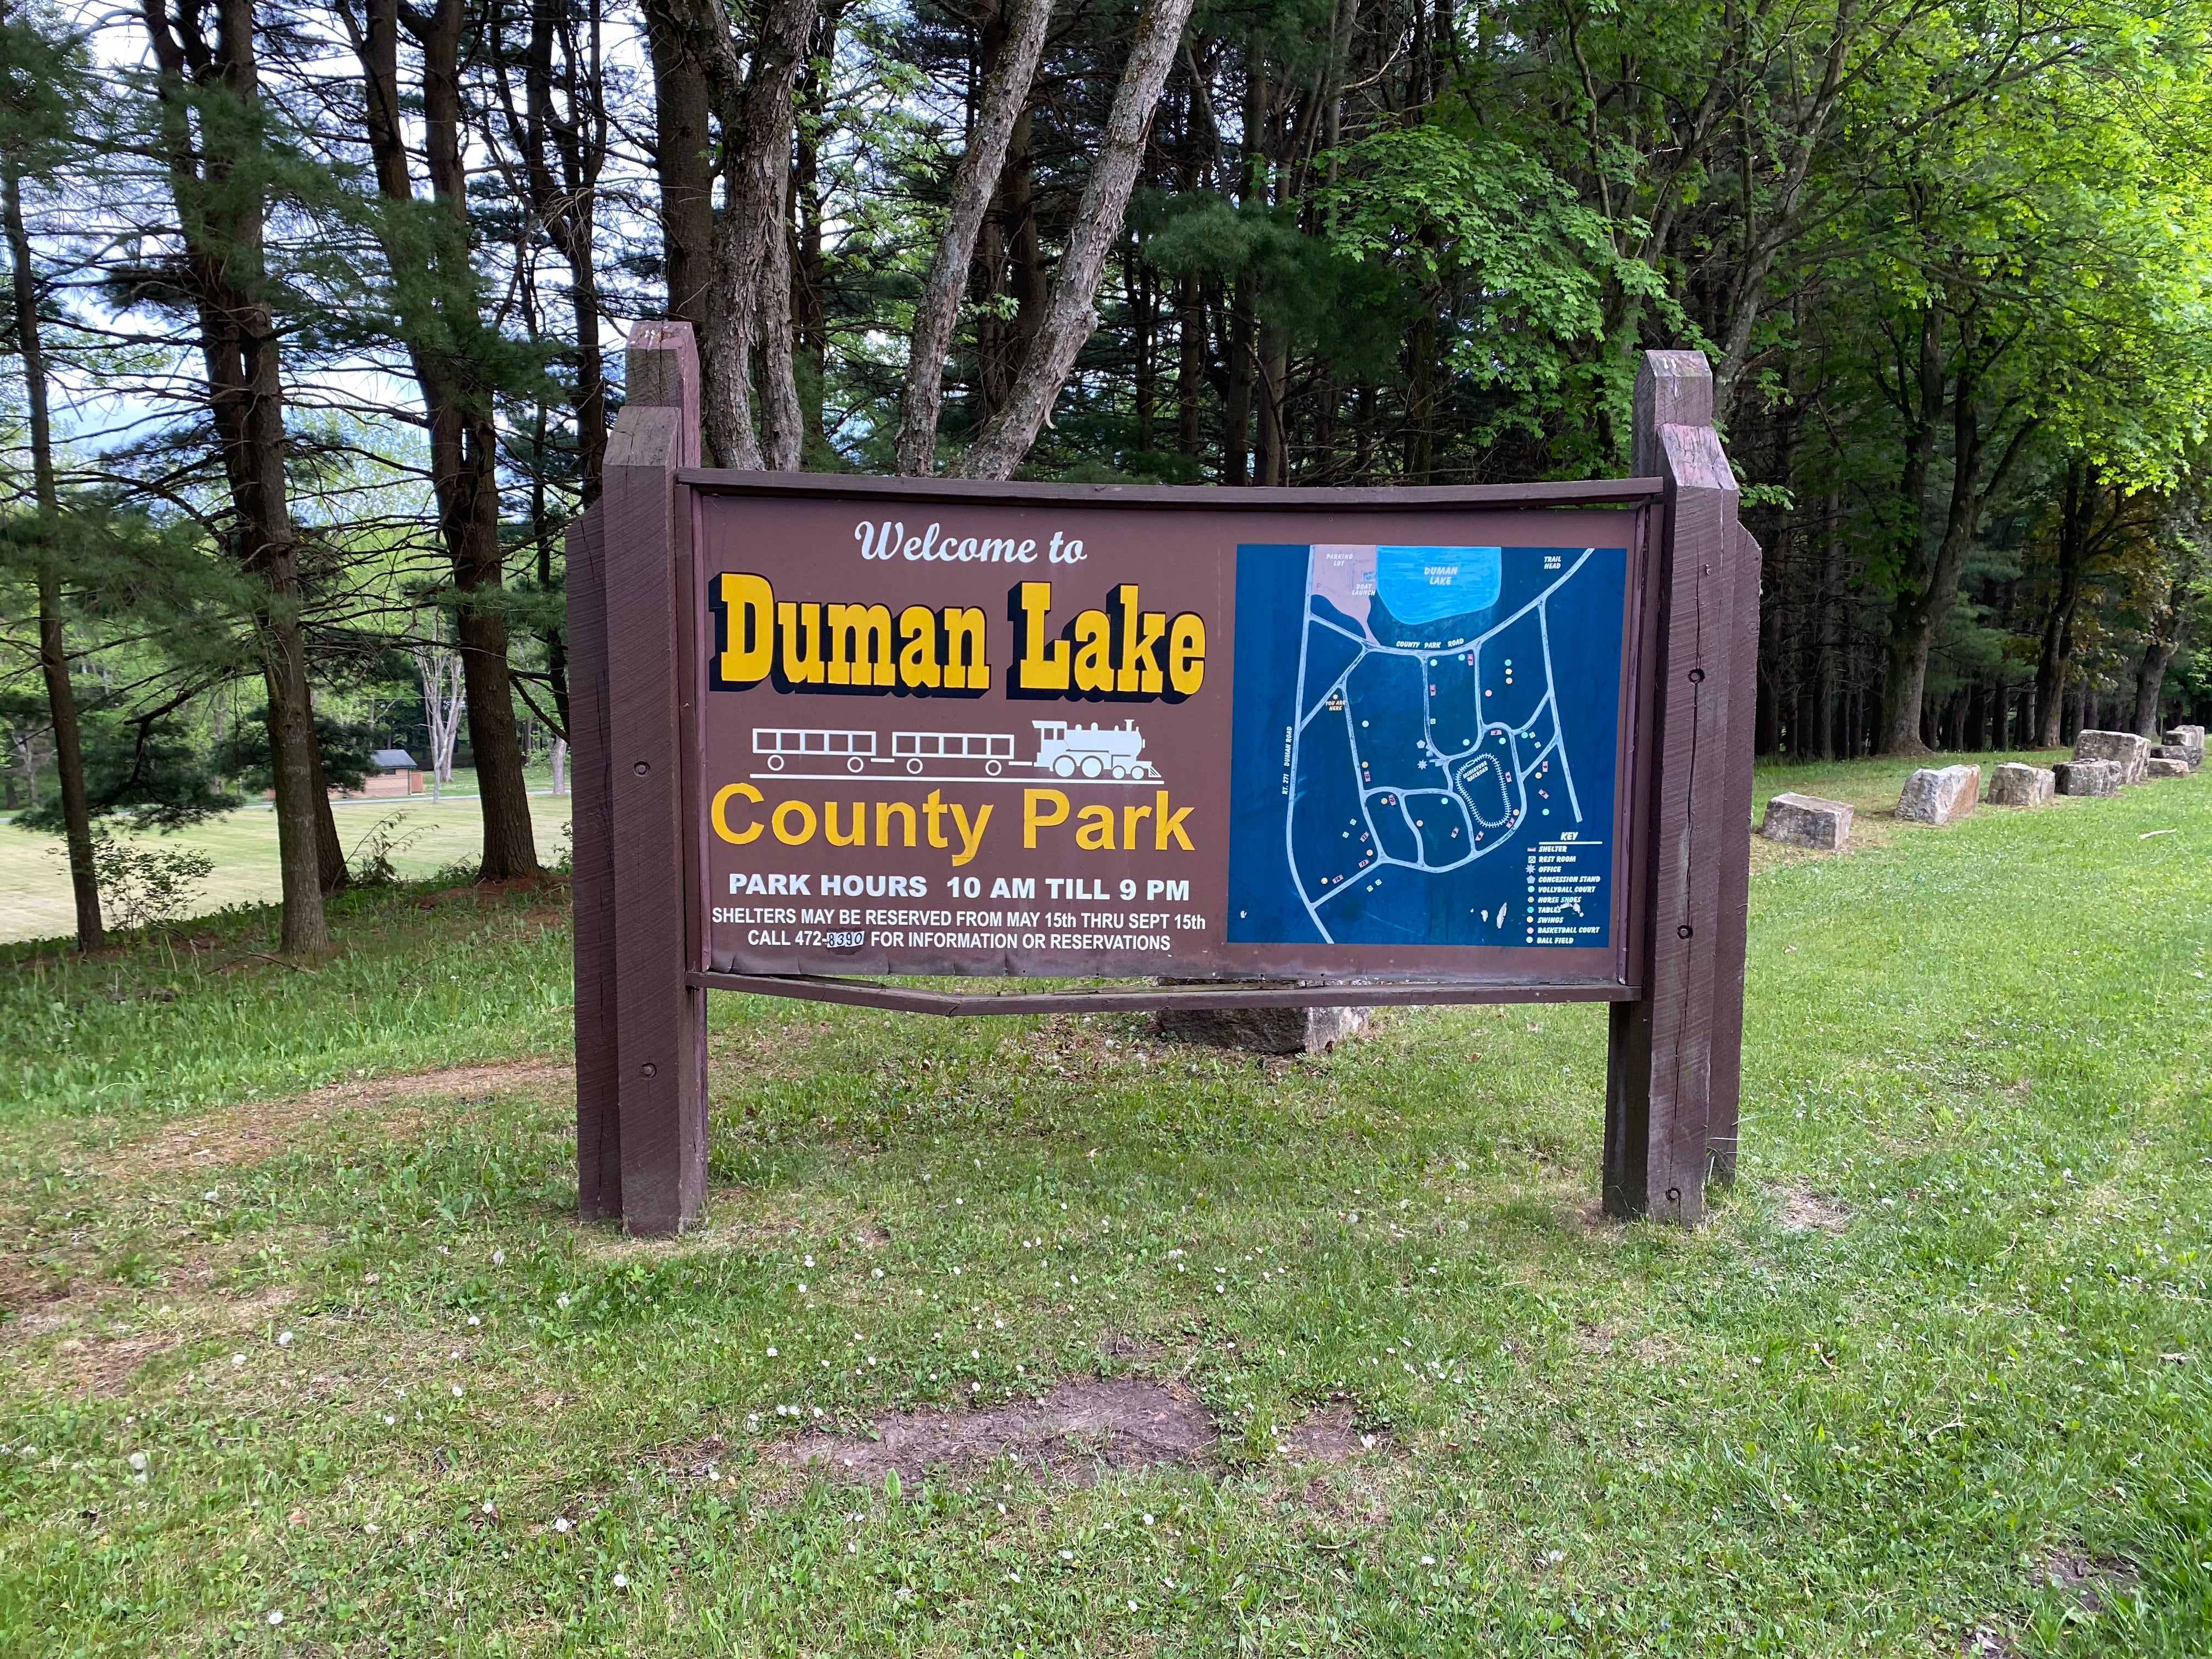 Camper submitted image from Duman Lake County Park - 1